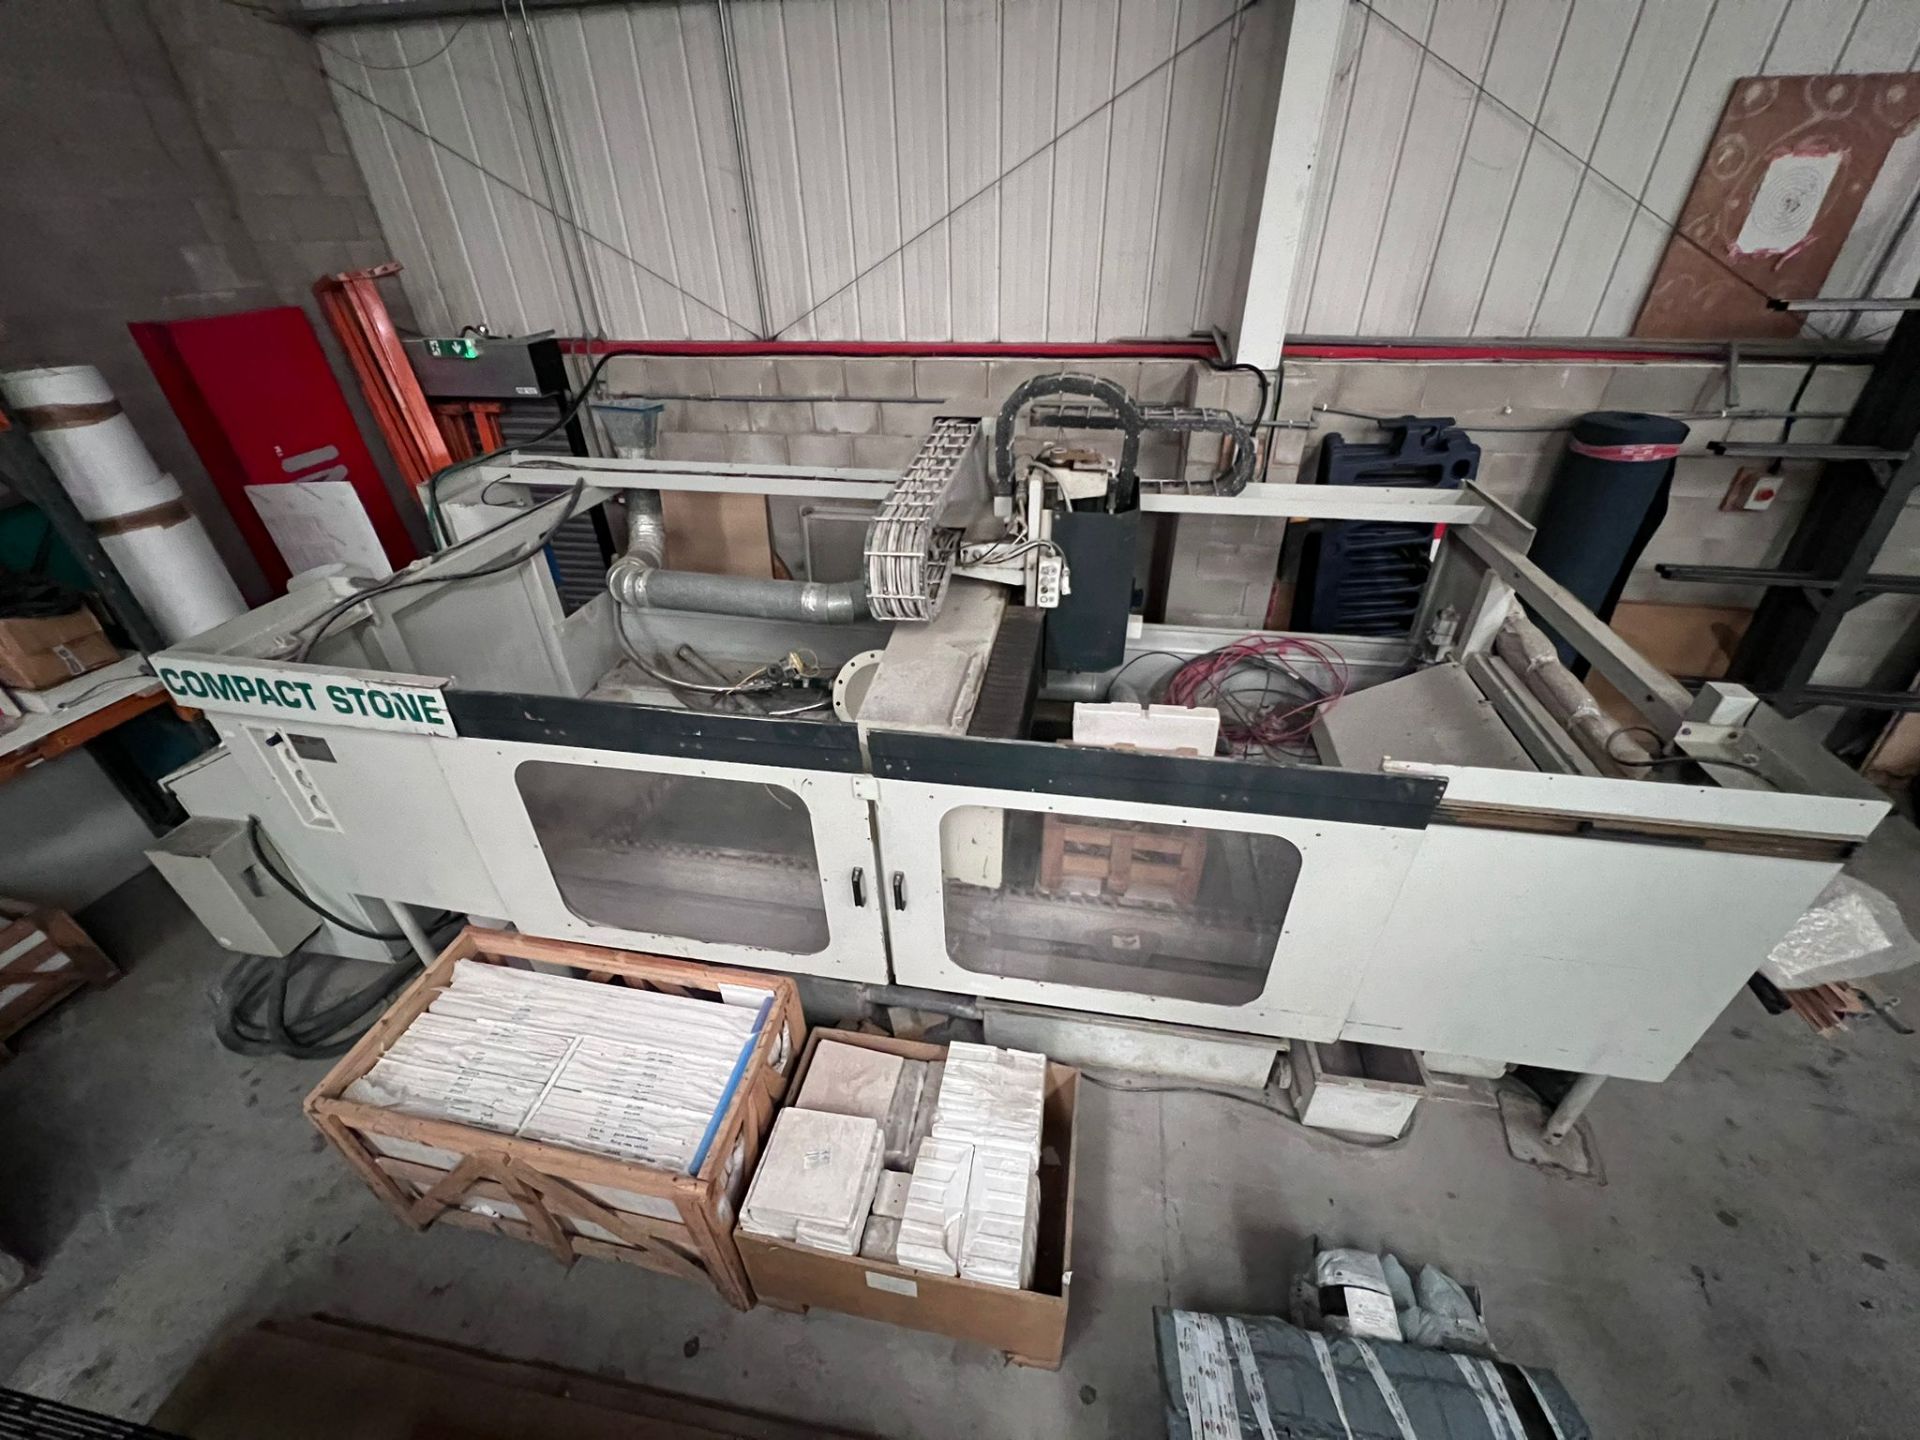 Intermac Compact Stone CNC Machine serial no. 90775 with a Broomwade Refrigerated Dryer,